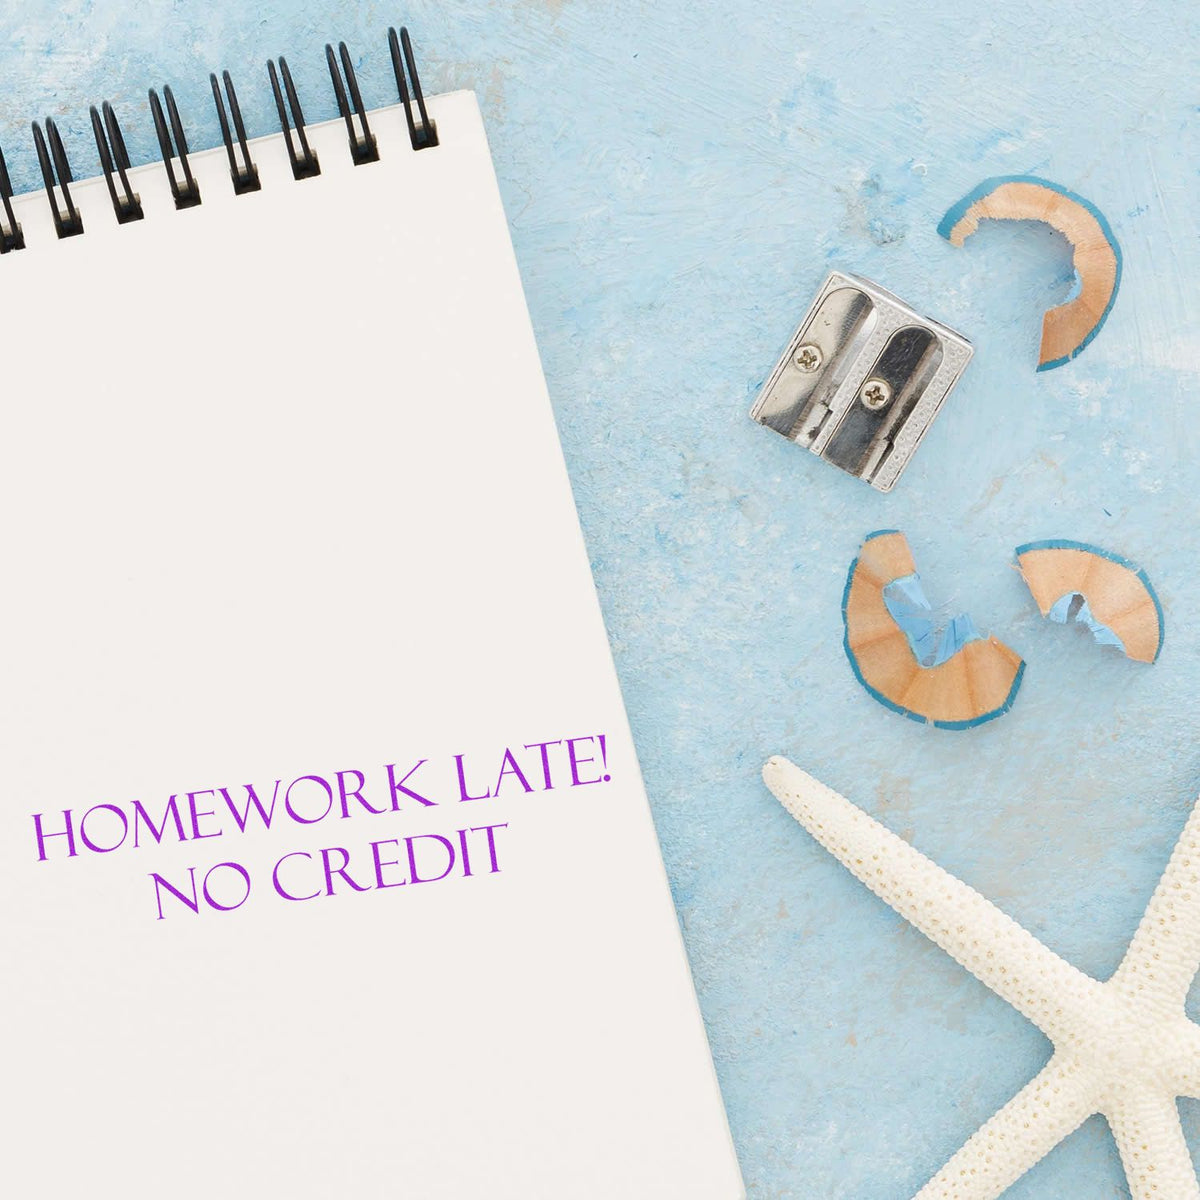 Large Pre-Inked Homework Late No Credit Stamp In Use